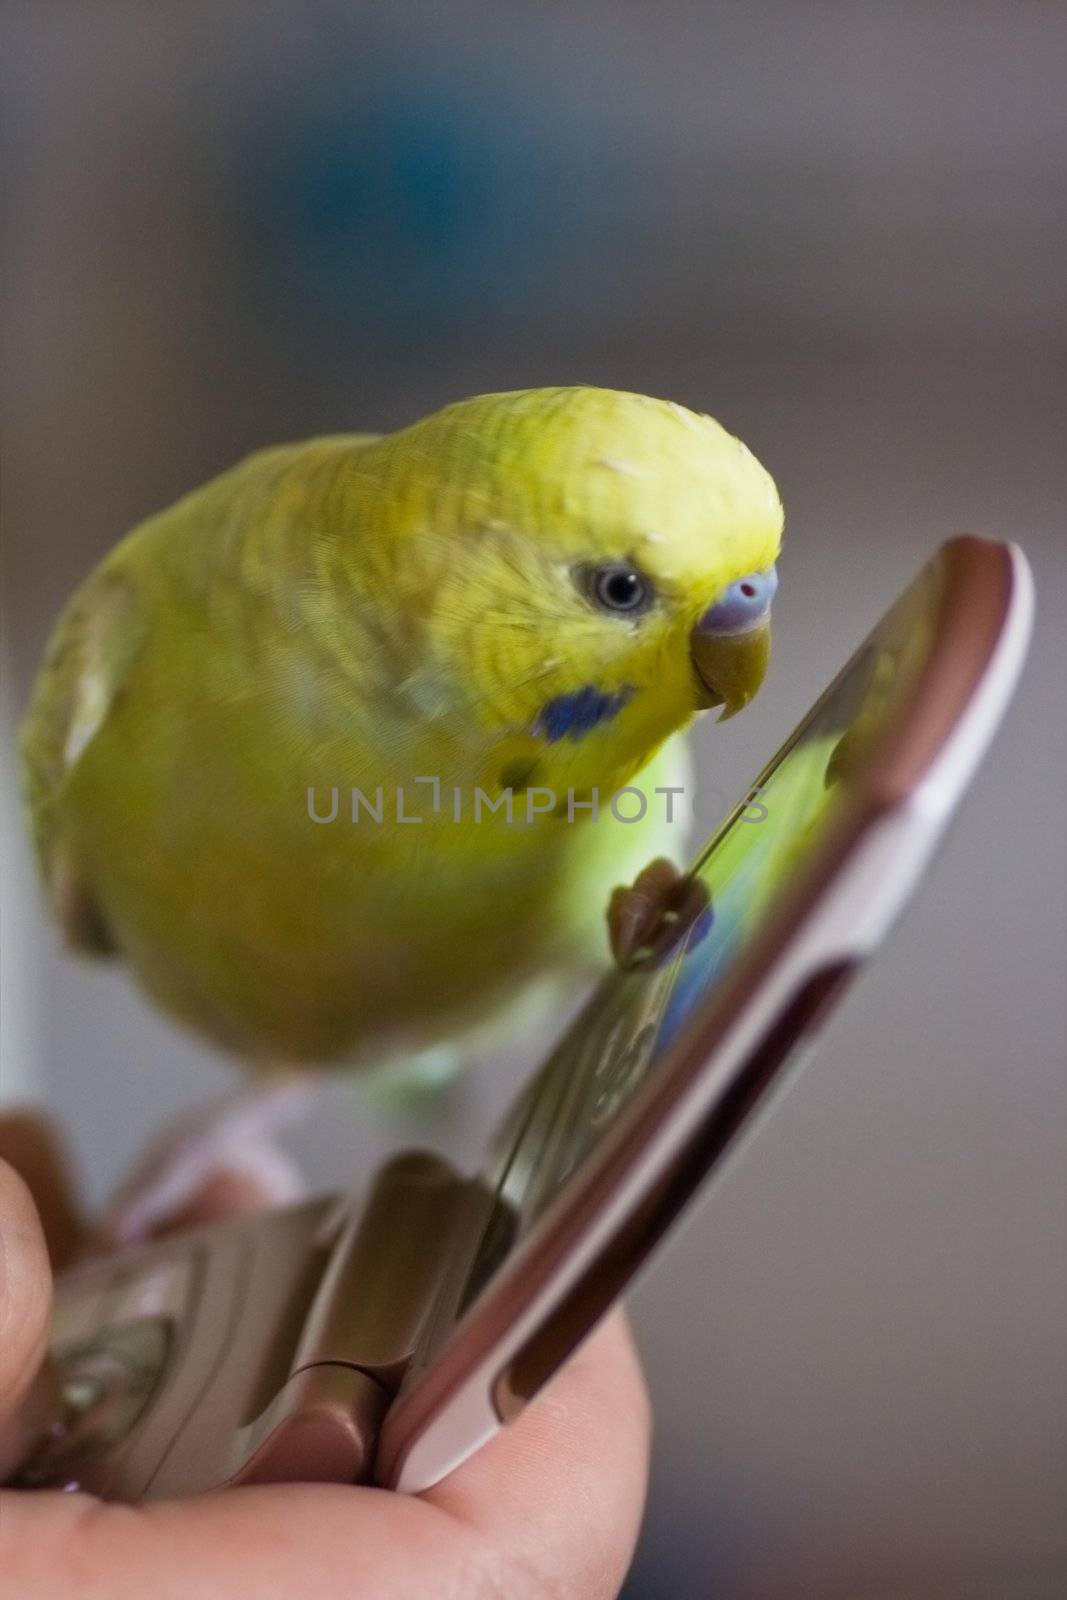 Small parakeet on cellphone by Colette